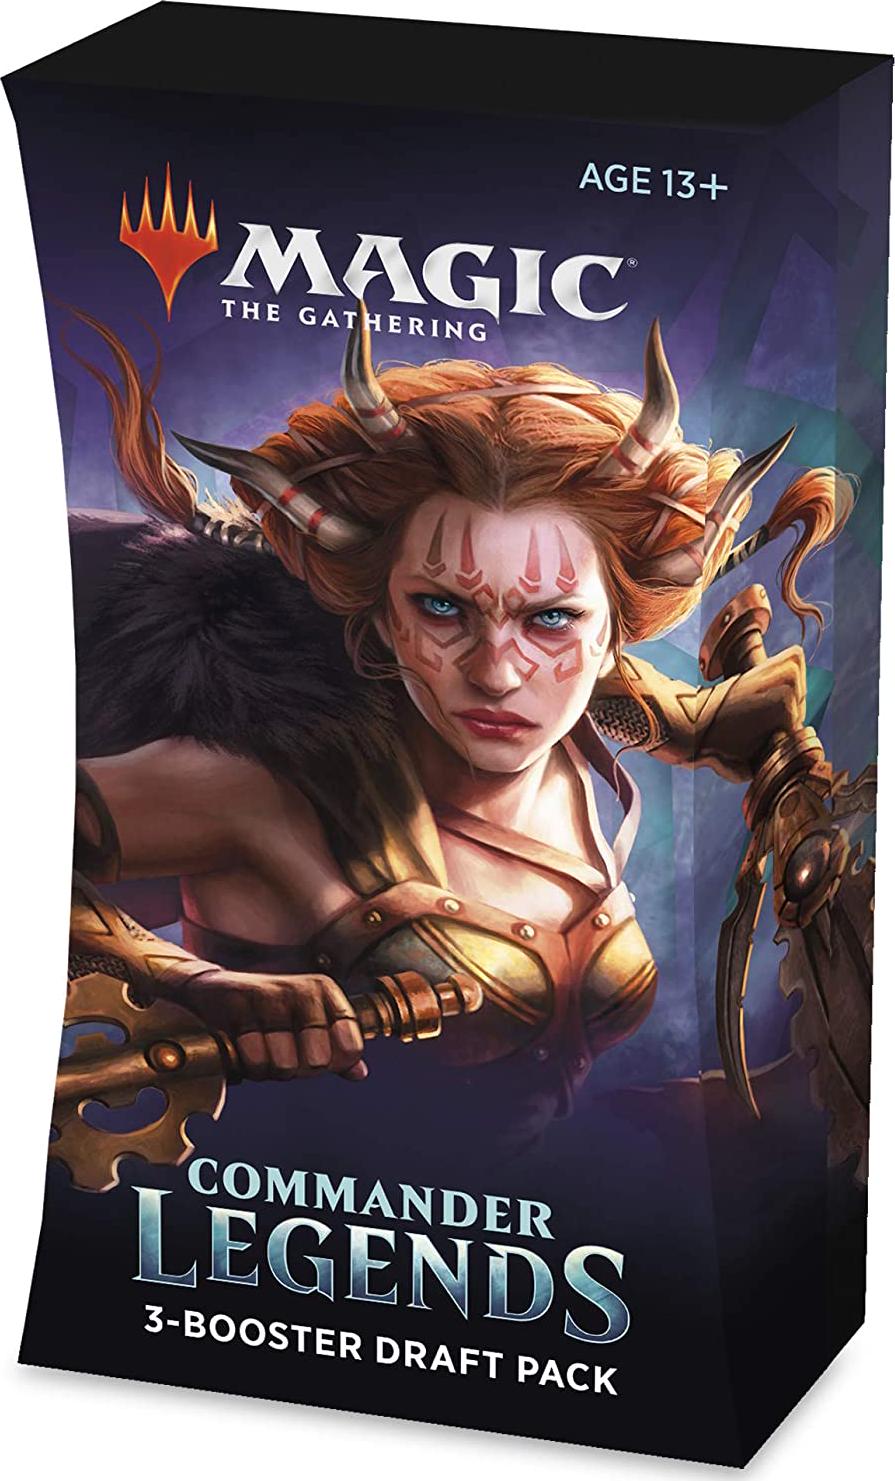 Magic The Gathering, Magic The Gathering Commander Legends 3-Booster Draft Pack 60 Cards 2 Legends Per Pack (C63300000)